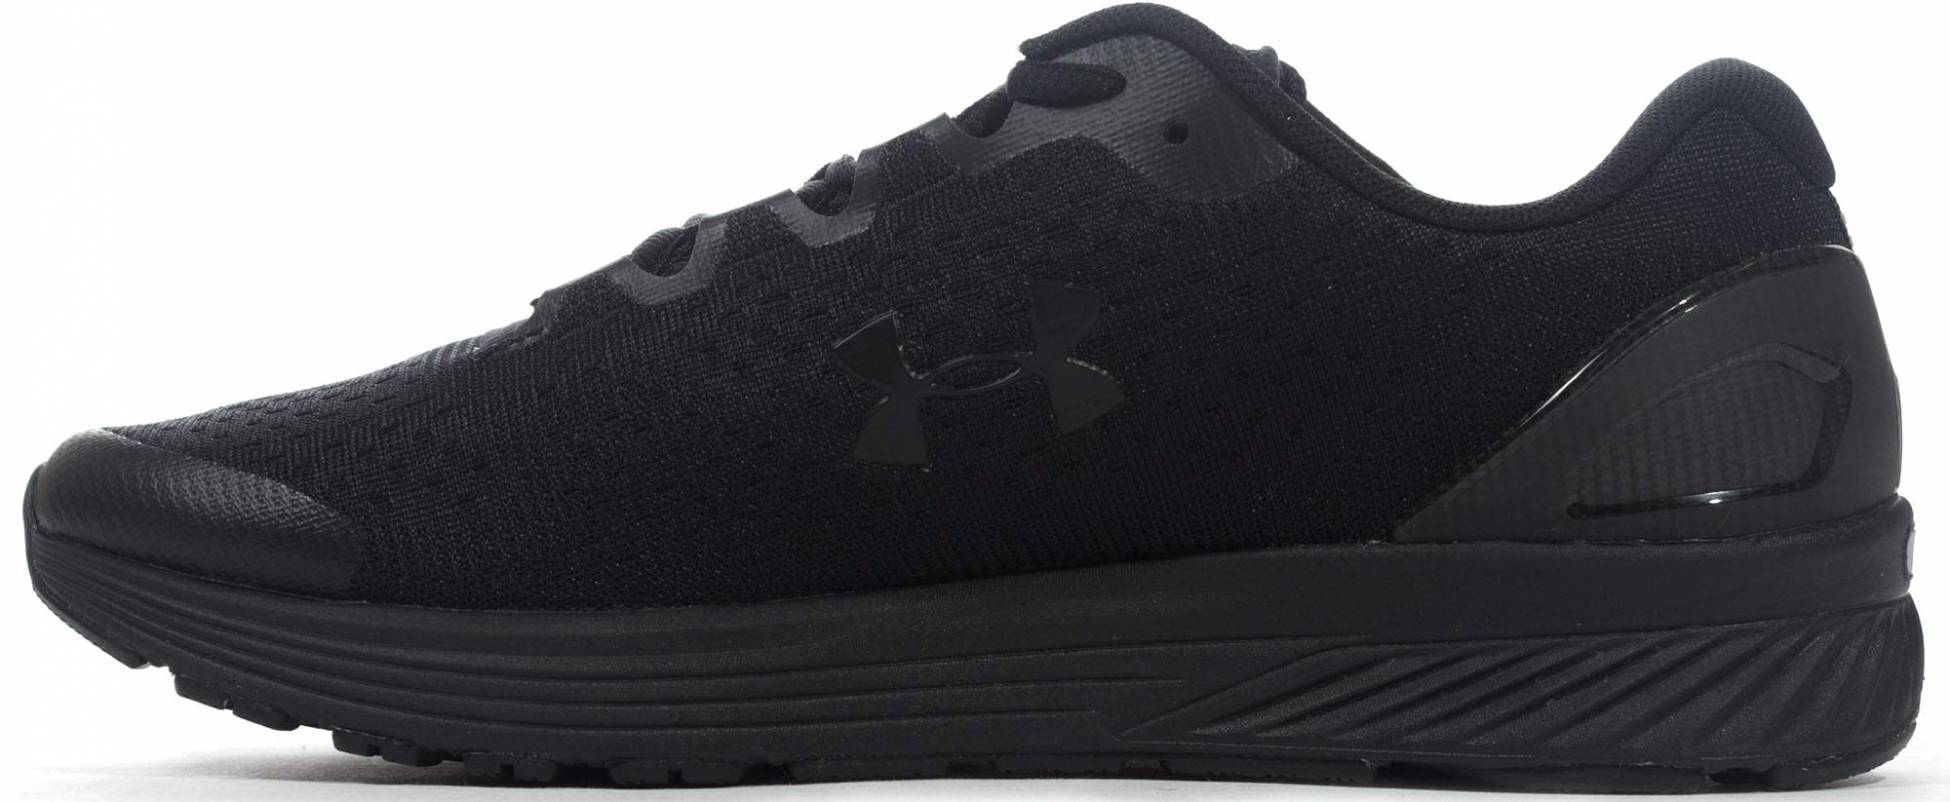 Under Armour Charged Bandit 4 Womens Running Shoes Black Cushioned Trainers 